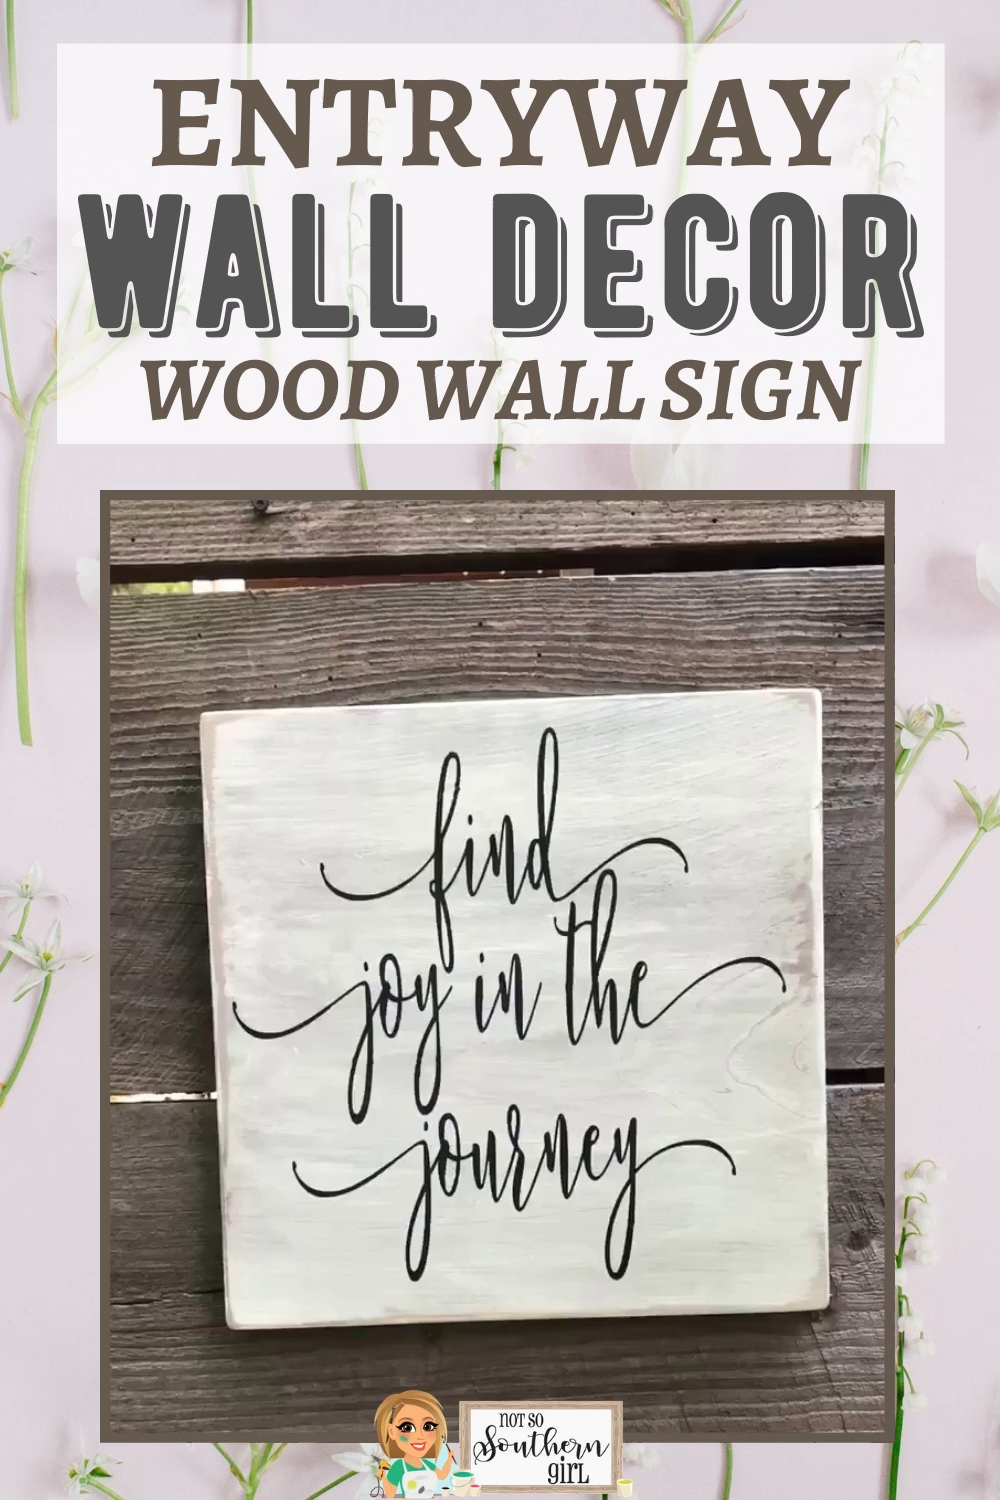 Entryway Wall Decor Wood Wall Sign -   19 home decor signs quote ideas